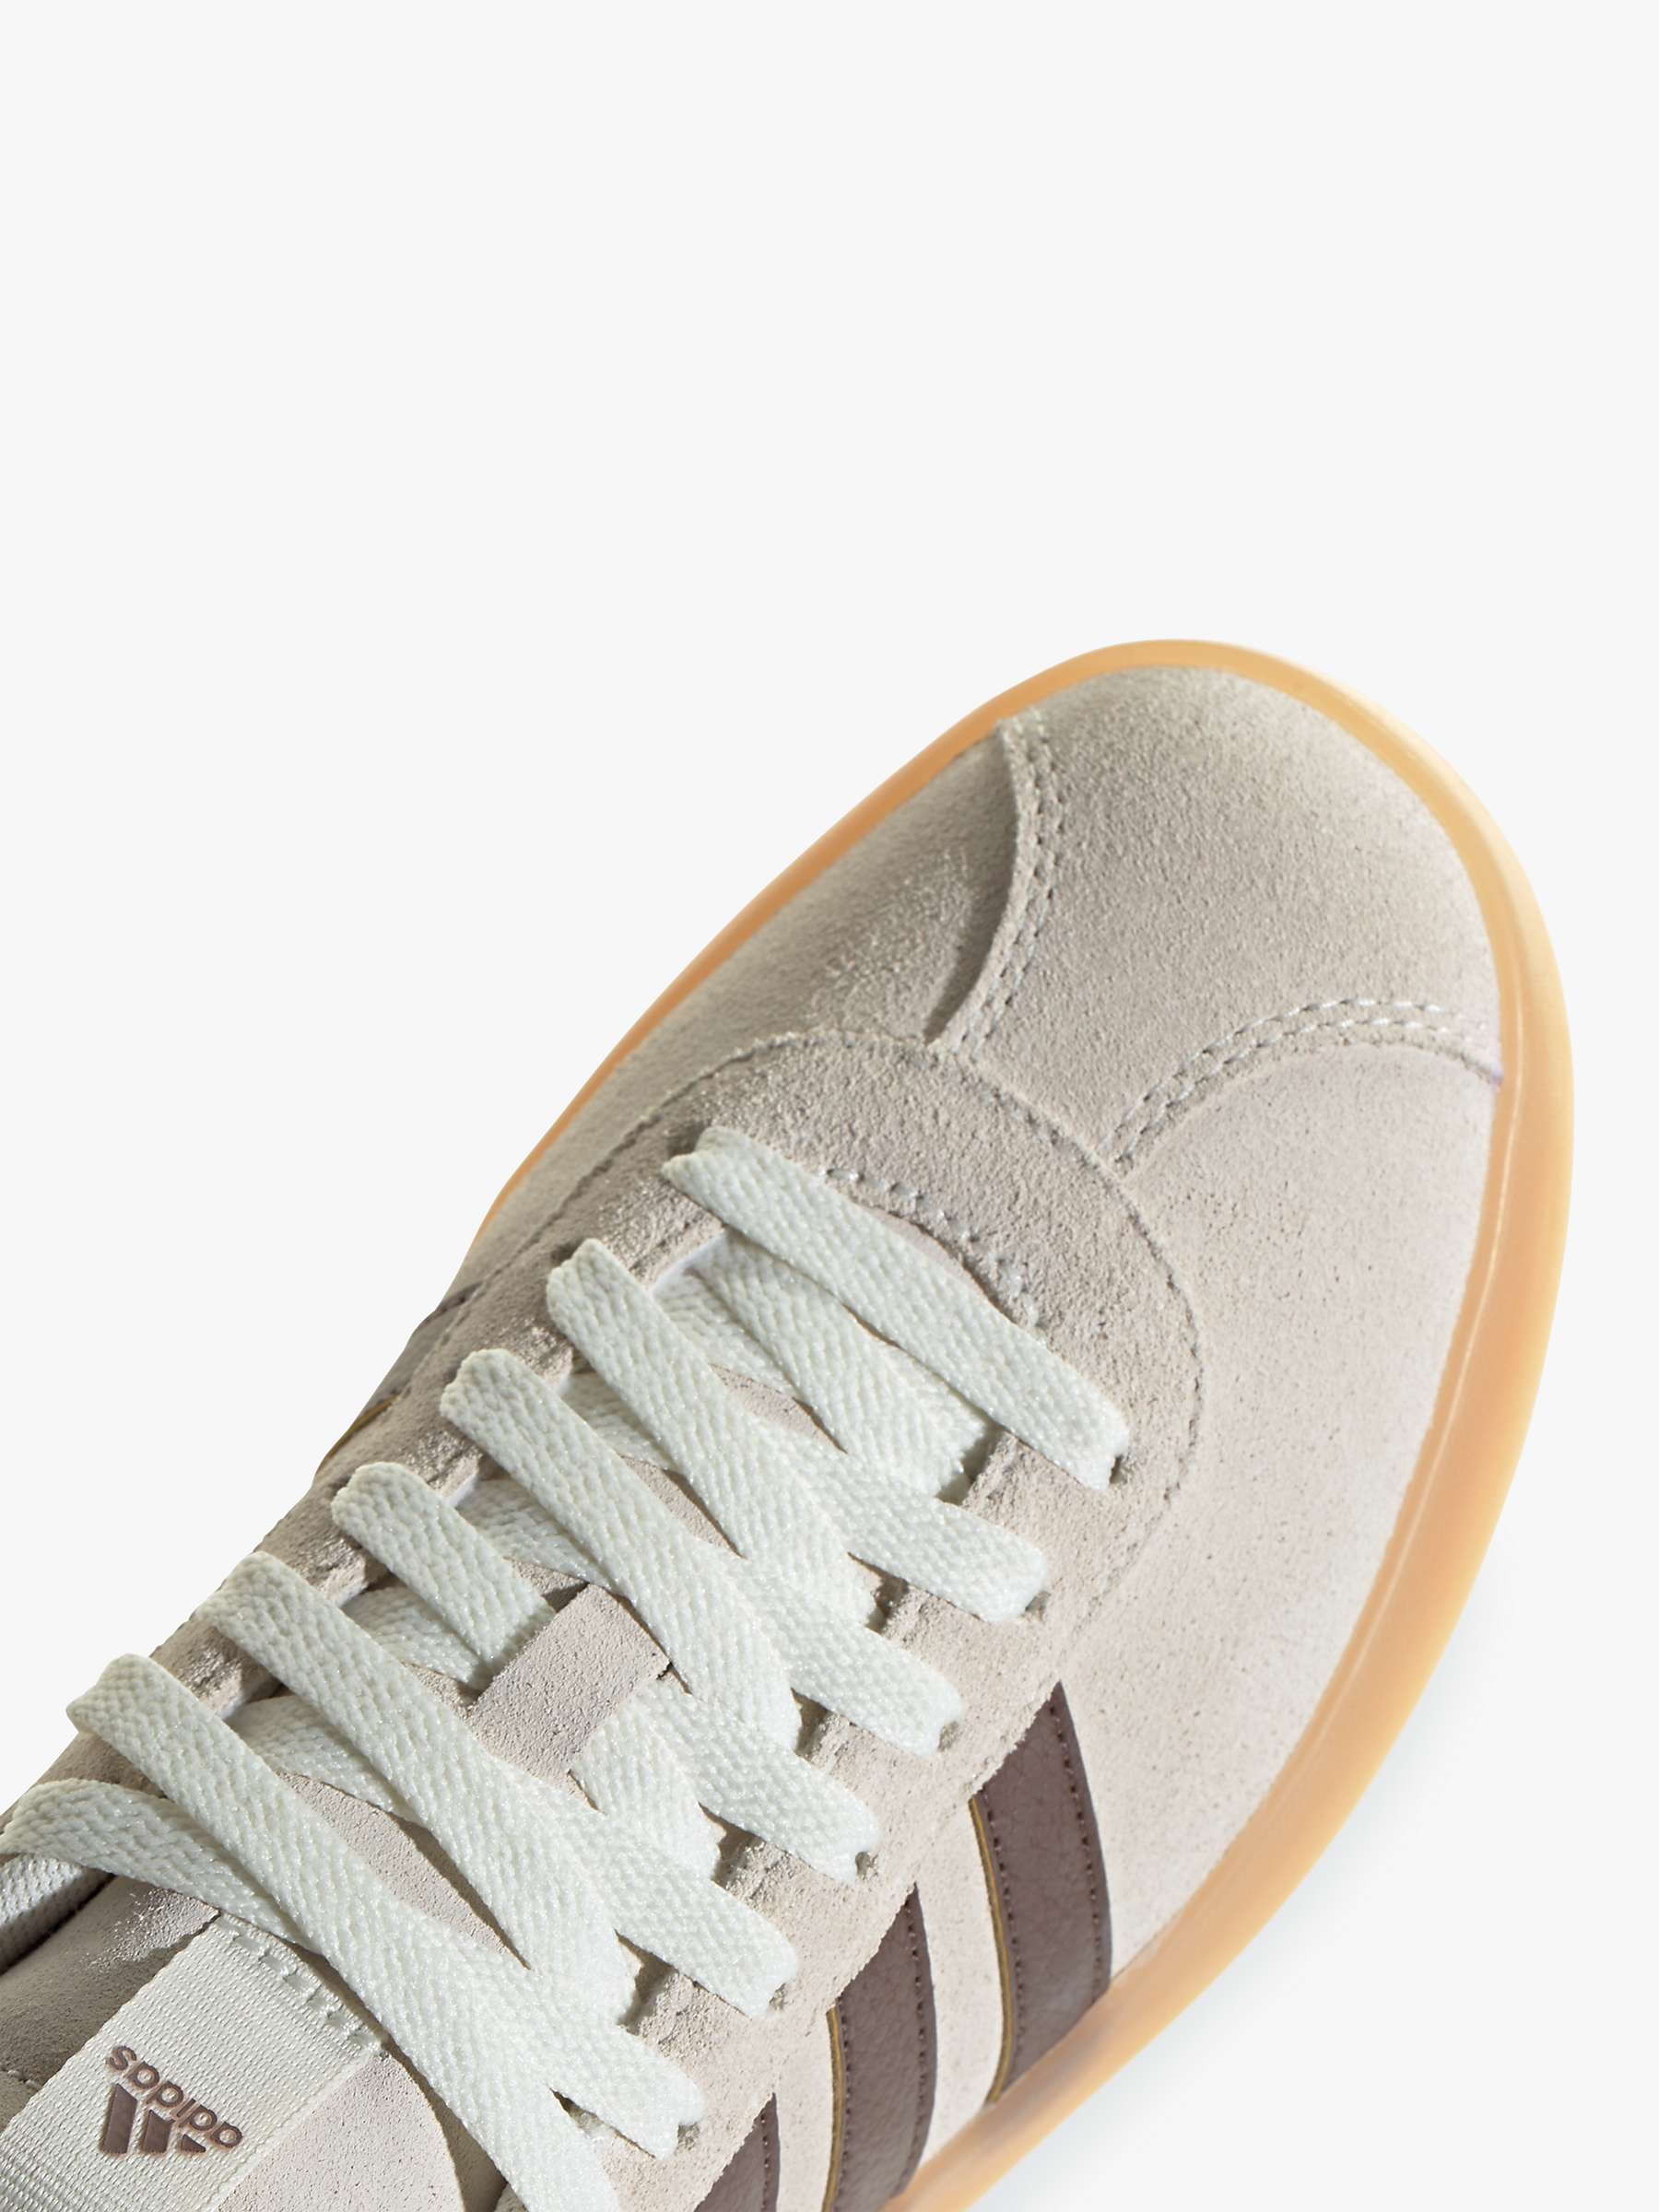 Buy adidas VL Court Trainers, White/Earth Online at johnlewis.com